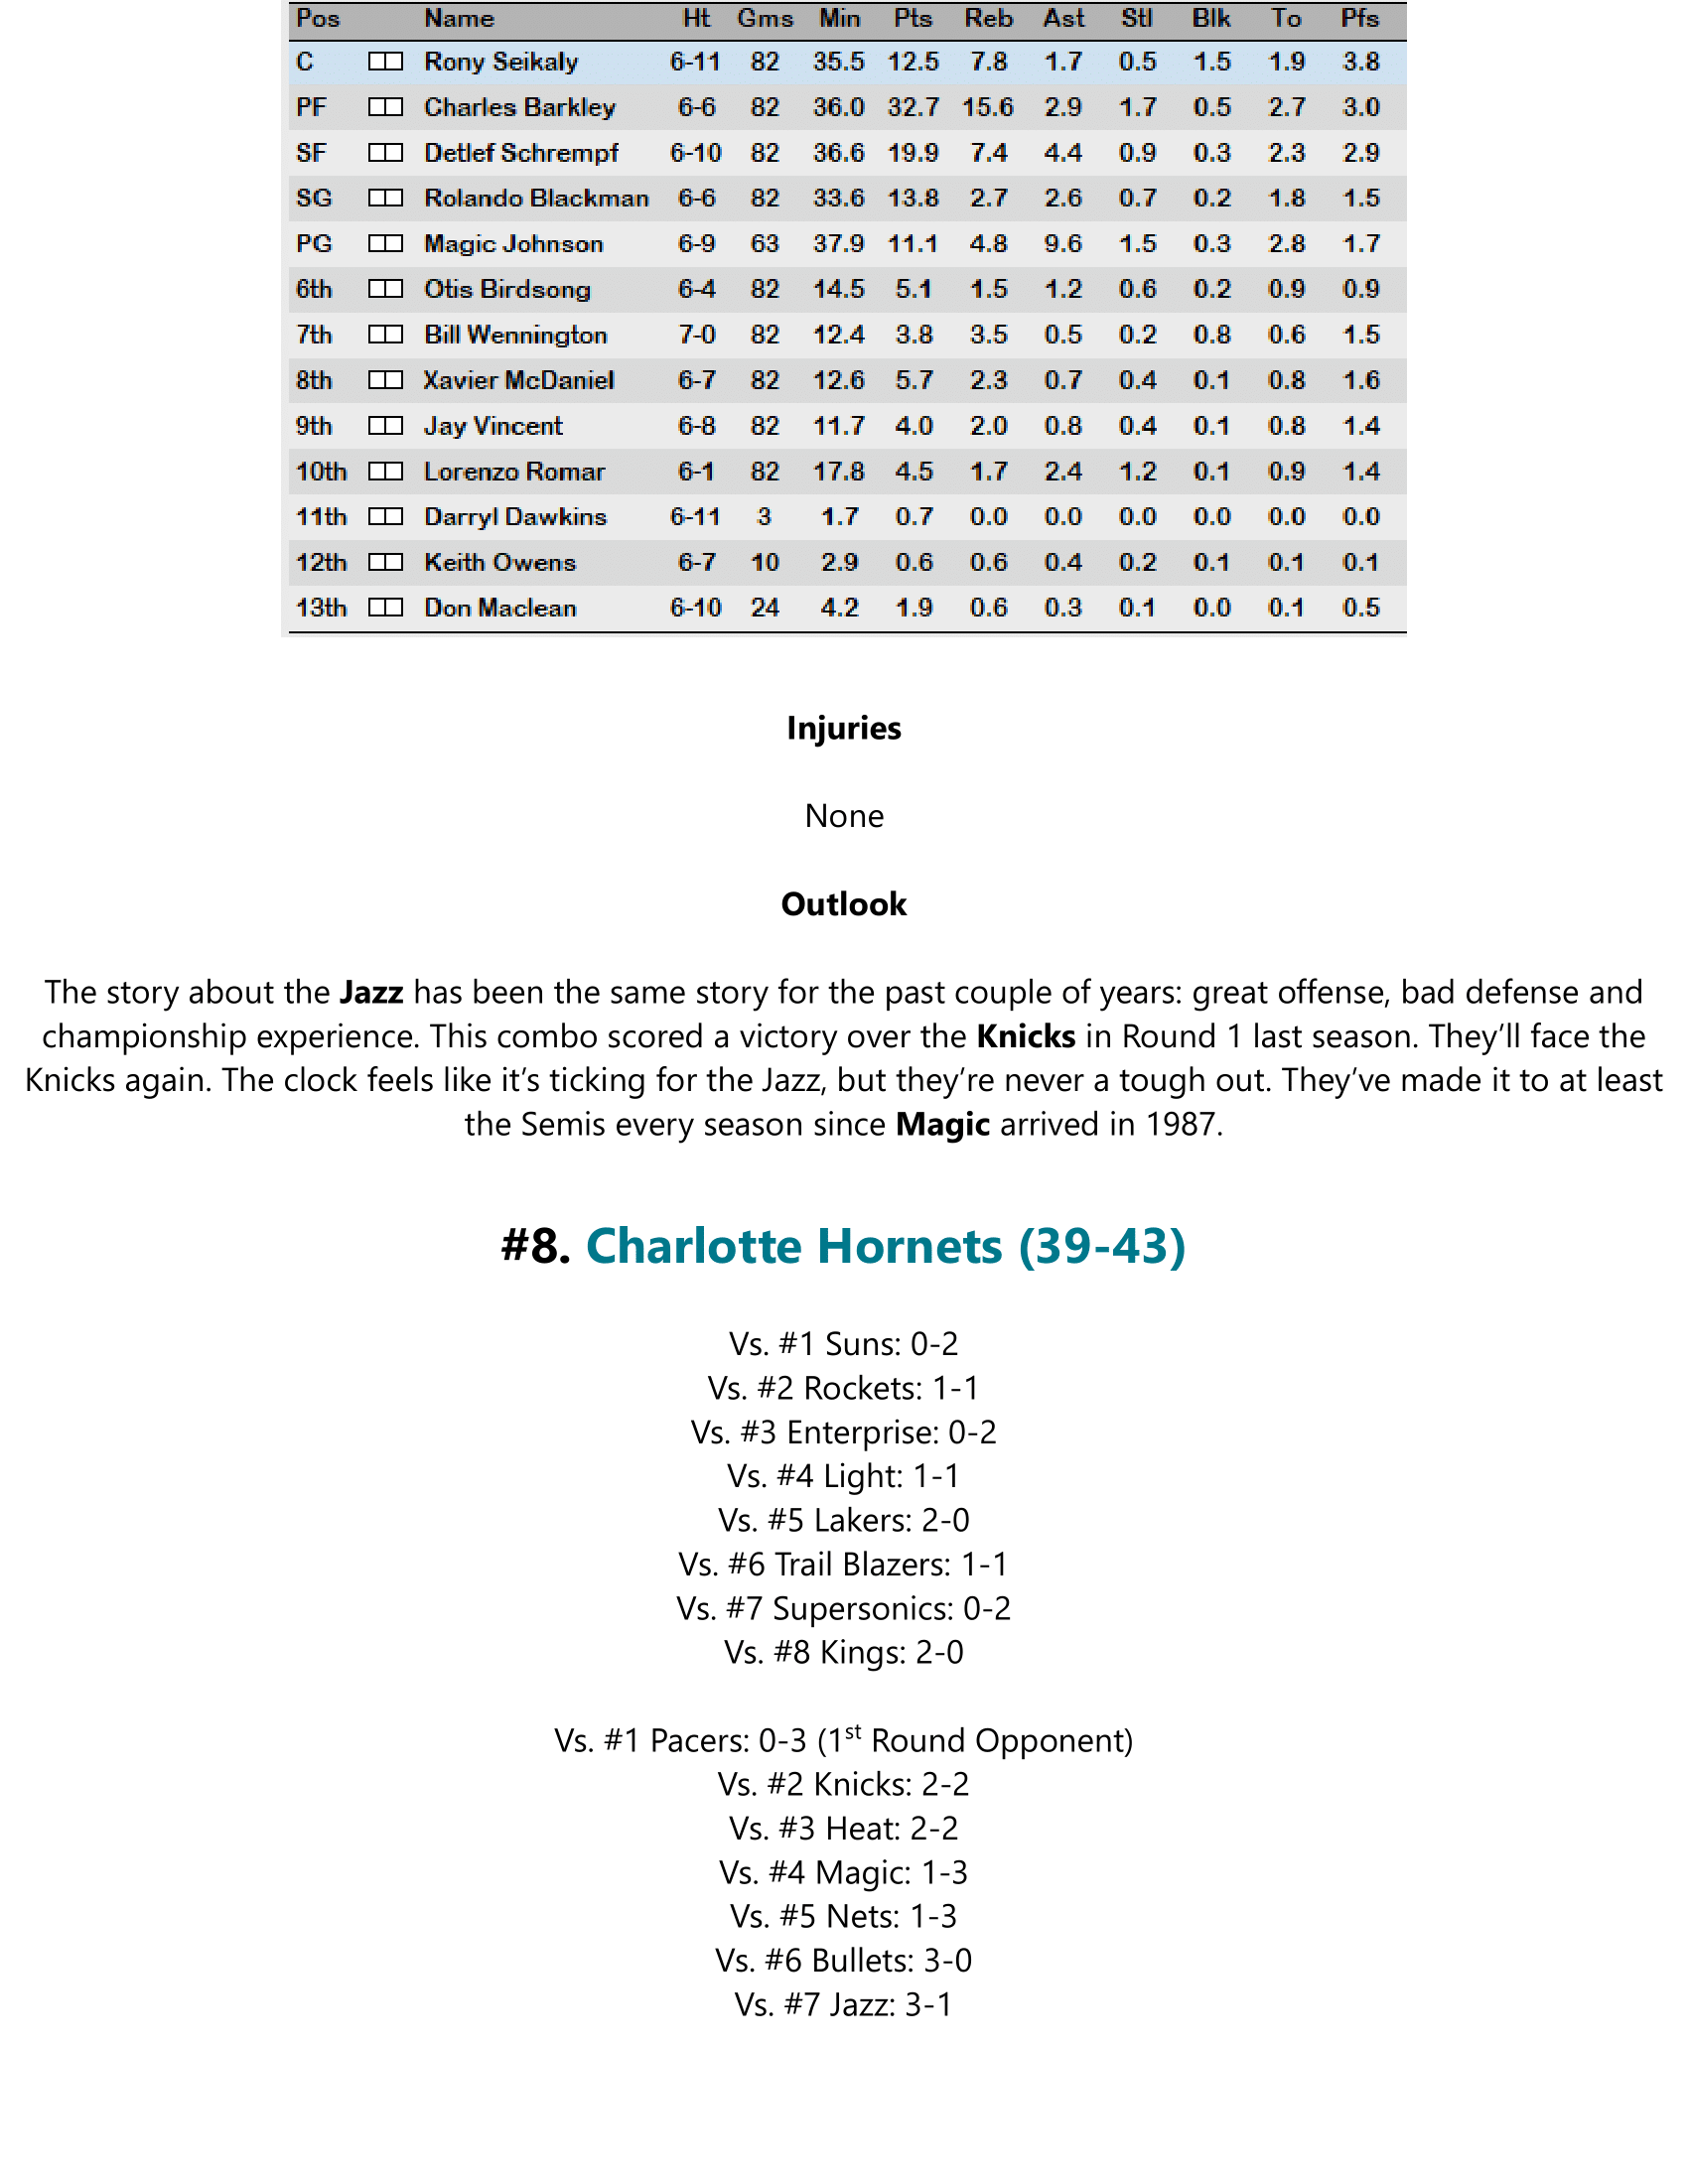 92-93-Part-4-Playoff-Preview-24.png